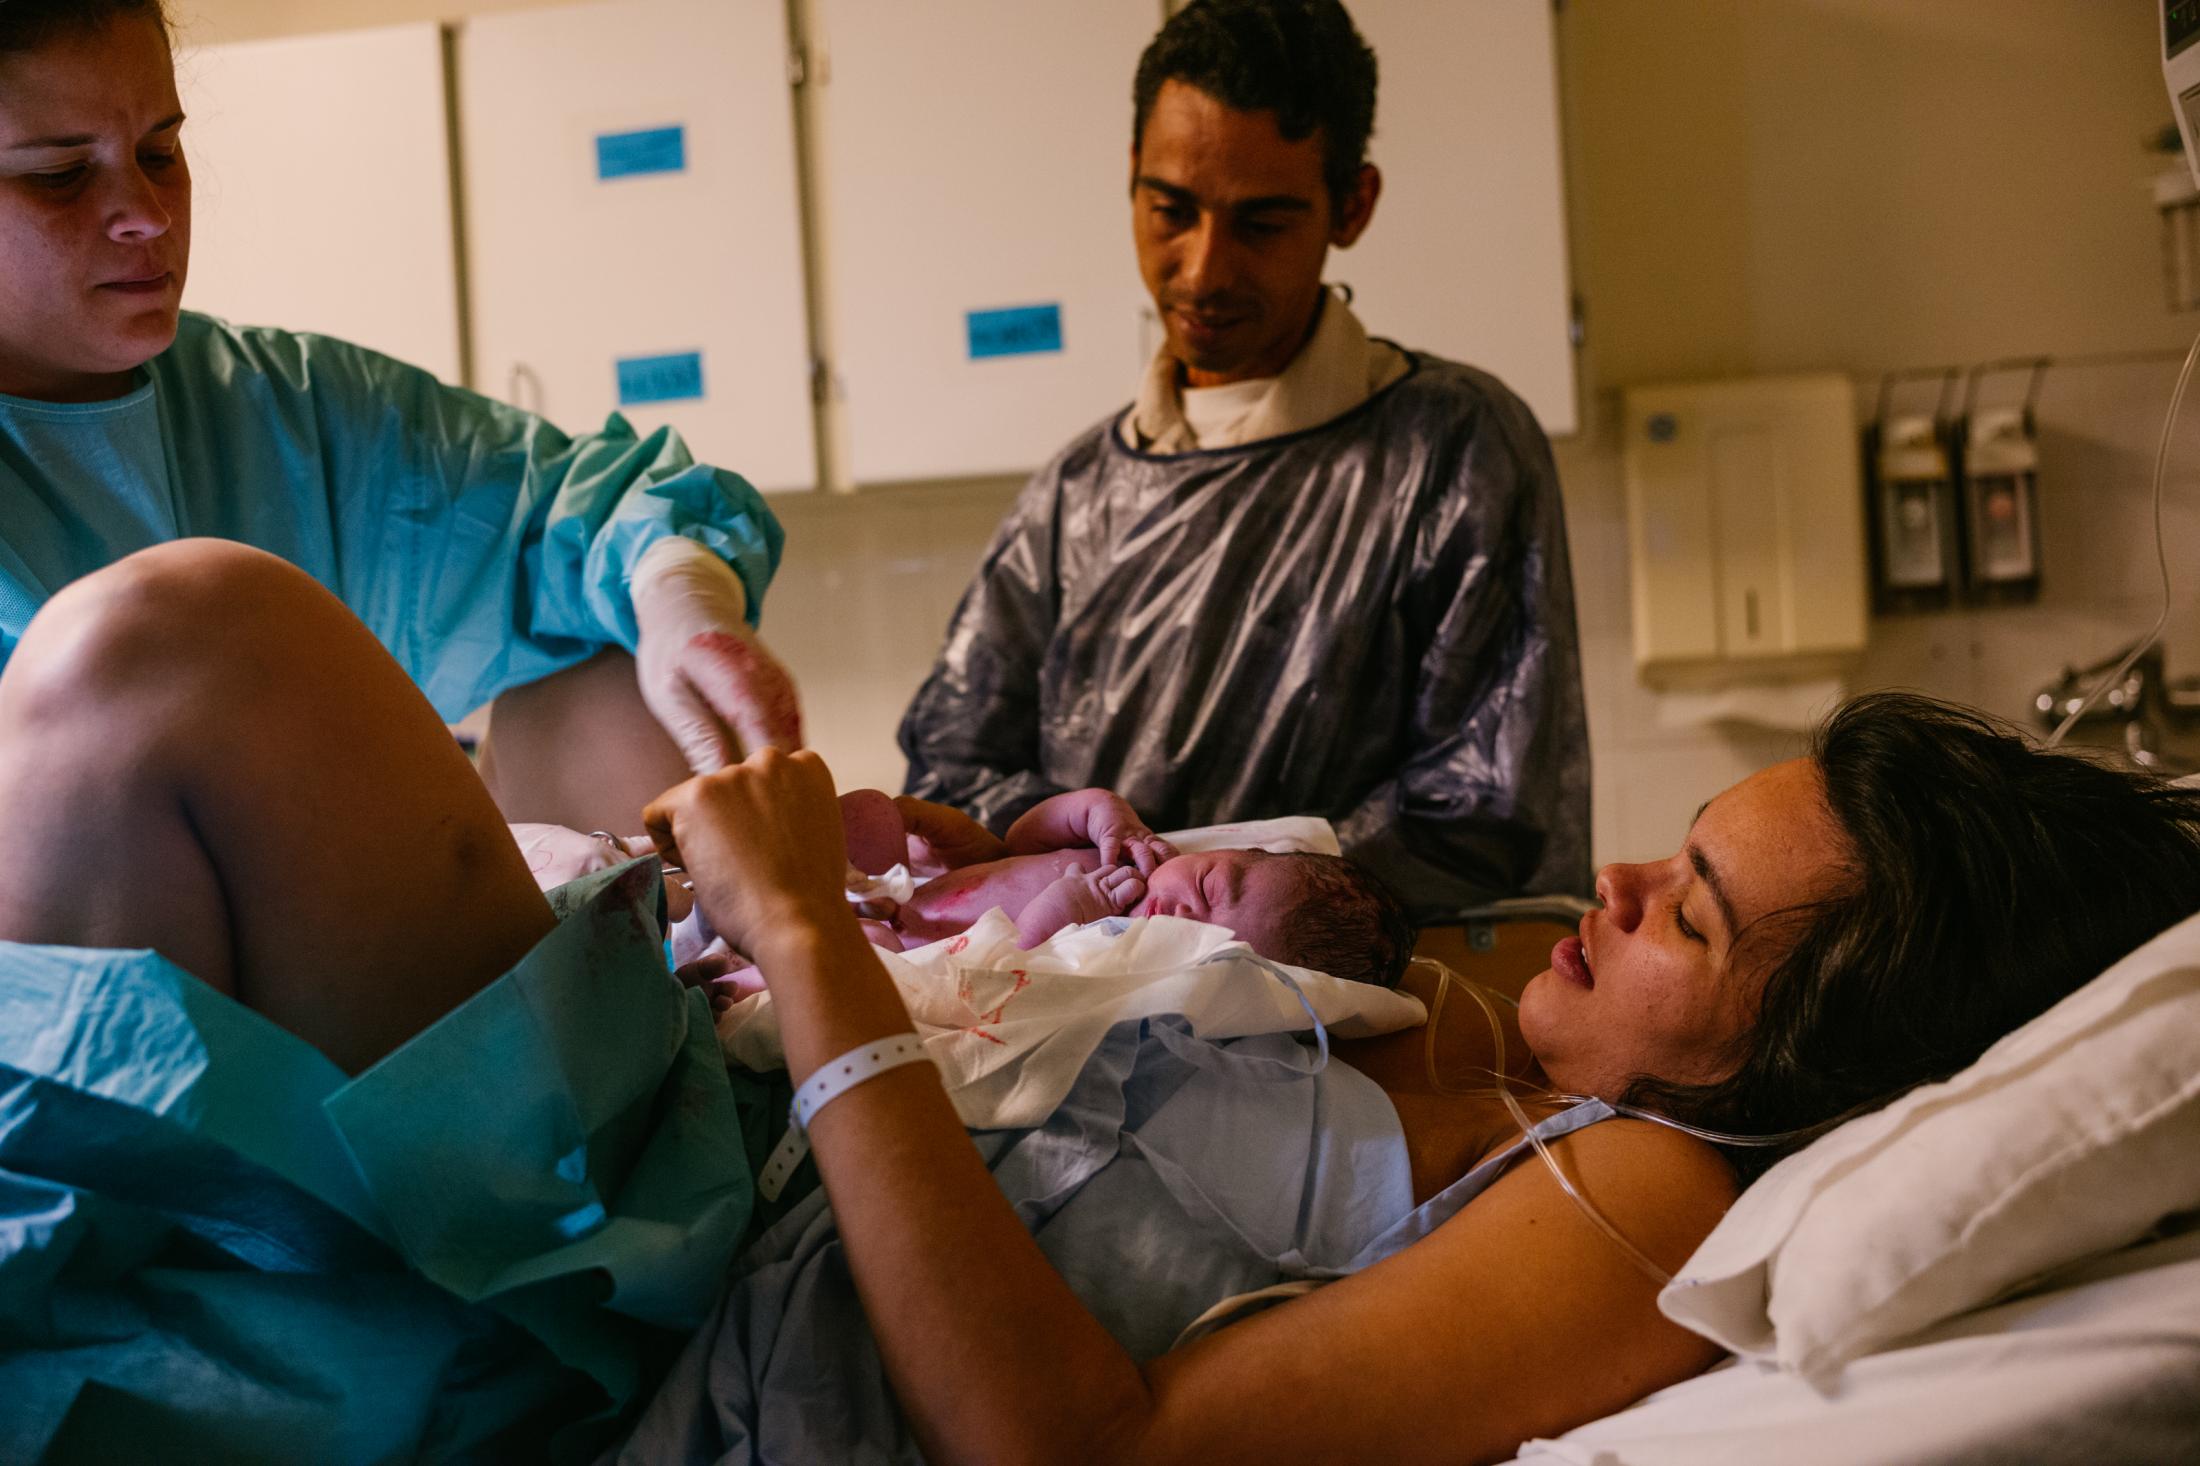 Carla and Josu&eacute; look at their newborn son at Hospital Dr. N&eacute;lio Mendon&ccedil;a in Funchal, Madeira, Portugal. 2nd January 2019. Medical care in Carla and Josu&eacute;&acute;s homeland of Venezuela is too precarious: since Maduro&#39;s rise to power, hospitals have lacked staff and medication, and the number of mothers and children who die at birth has skyrocketed. Carla arrived in Madeira in August 2018, Josu&eacute; followed in November. They want to start a new life on the island.